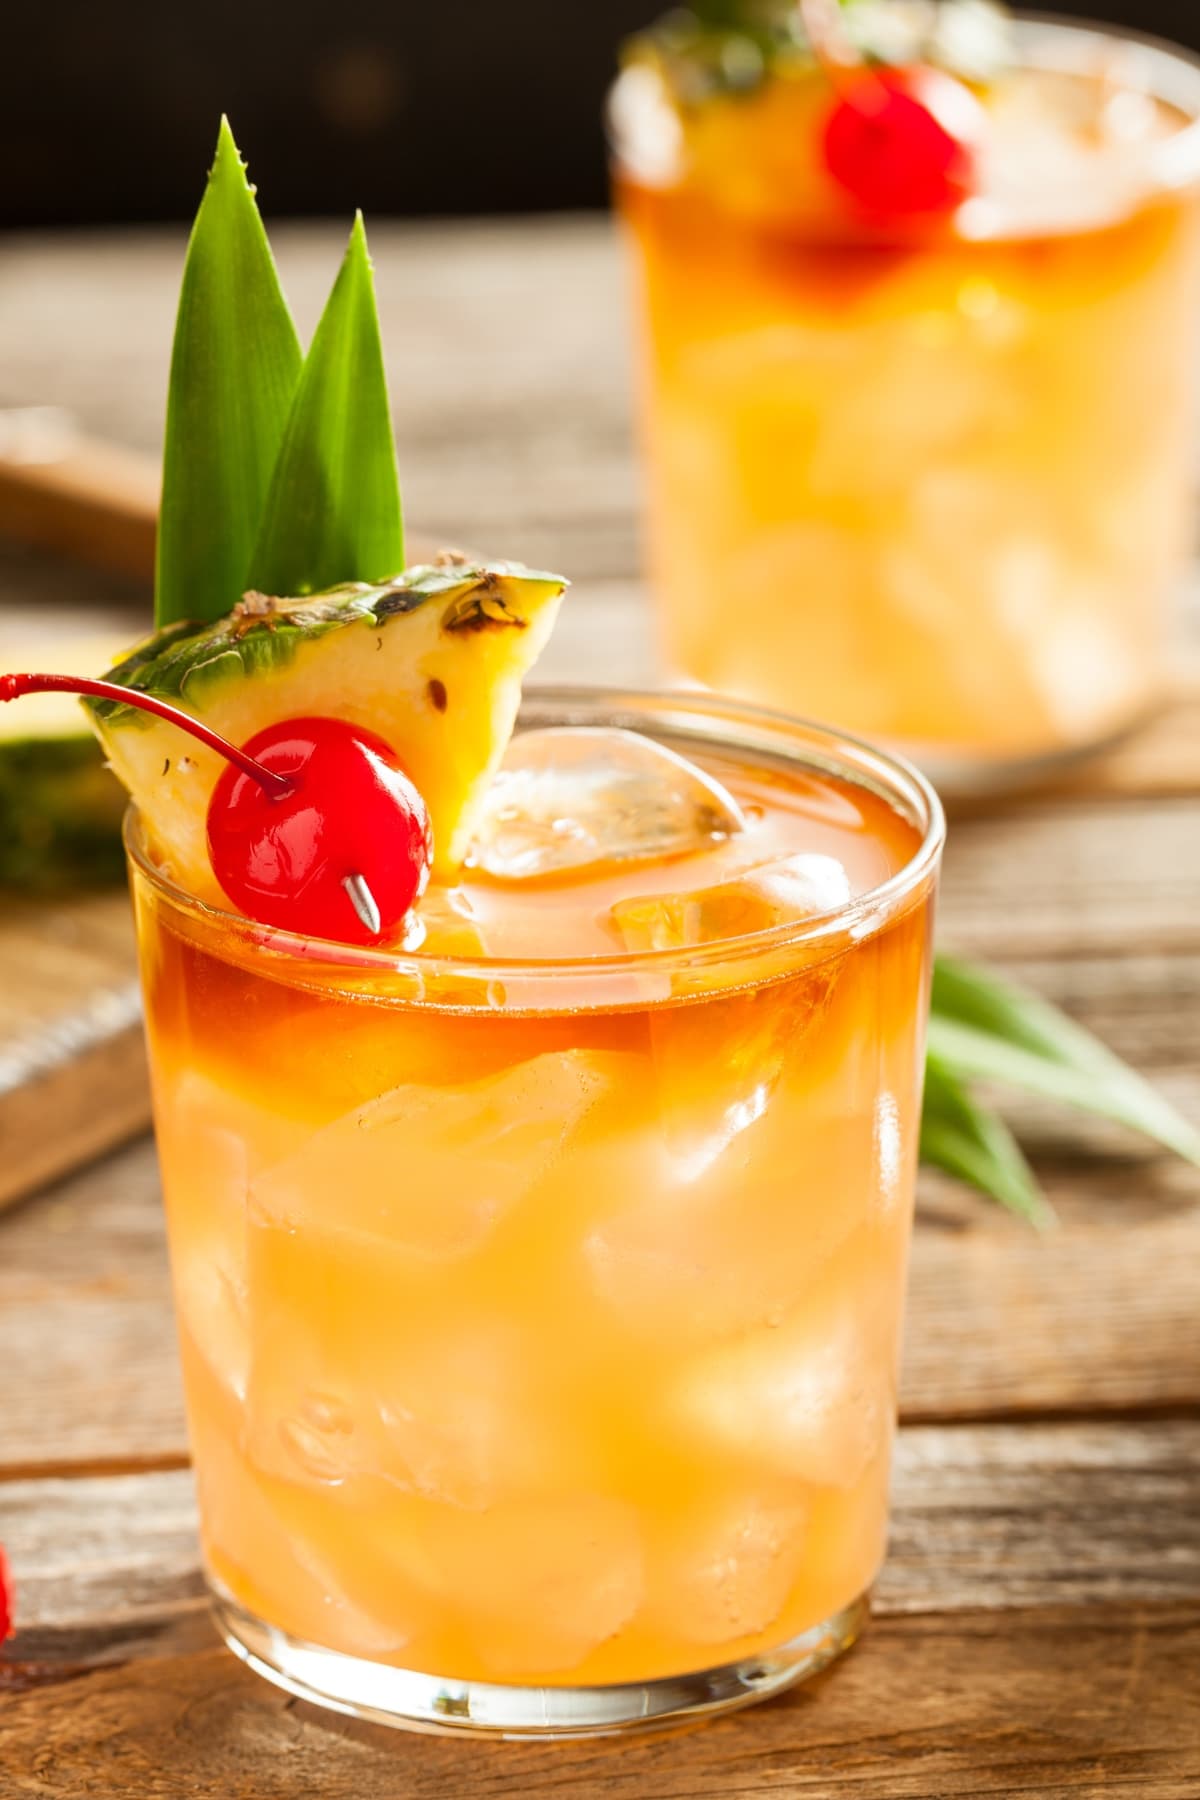 Classic Mai Tai Cocktail (Best Recipe) featuring Two Glasses of Refreshing Mai Tai Cocktail with a Pineapple, Cherry, and Leaf Garnish